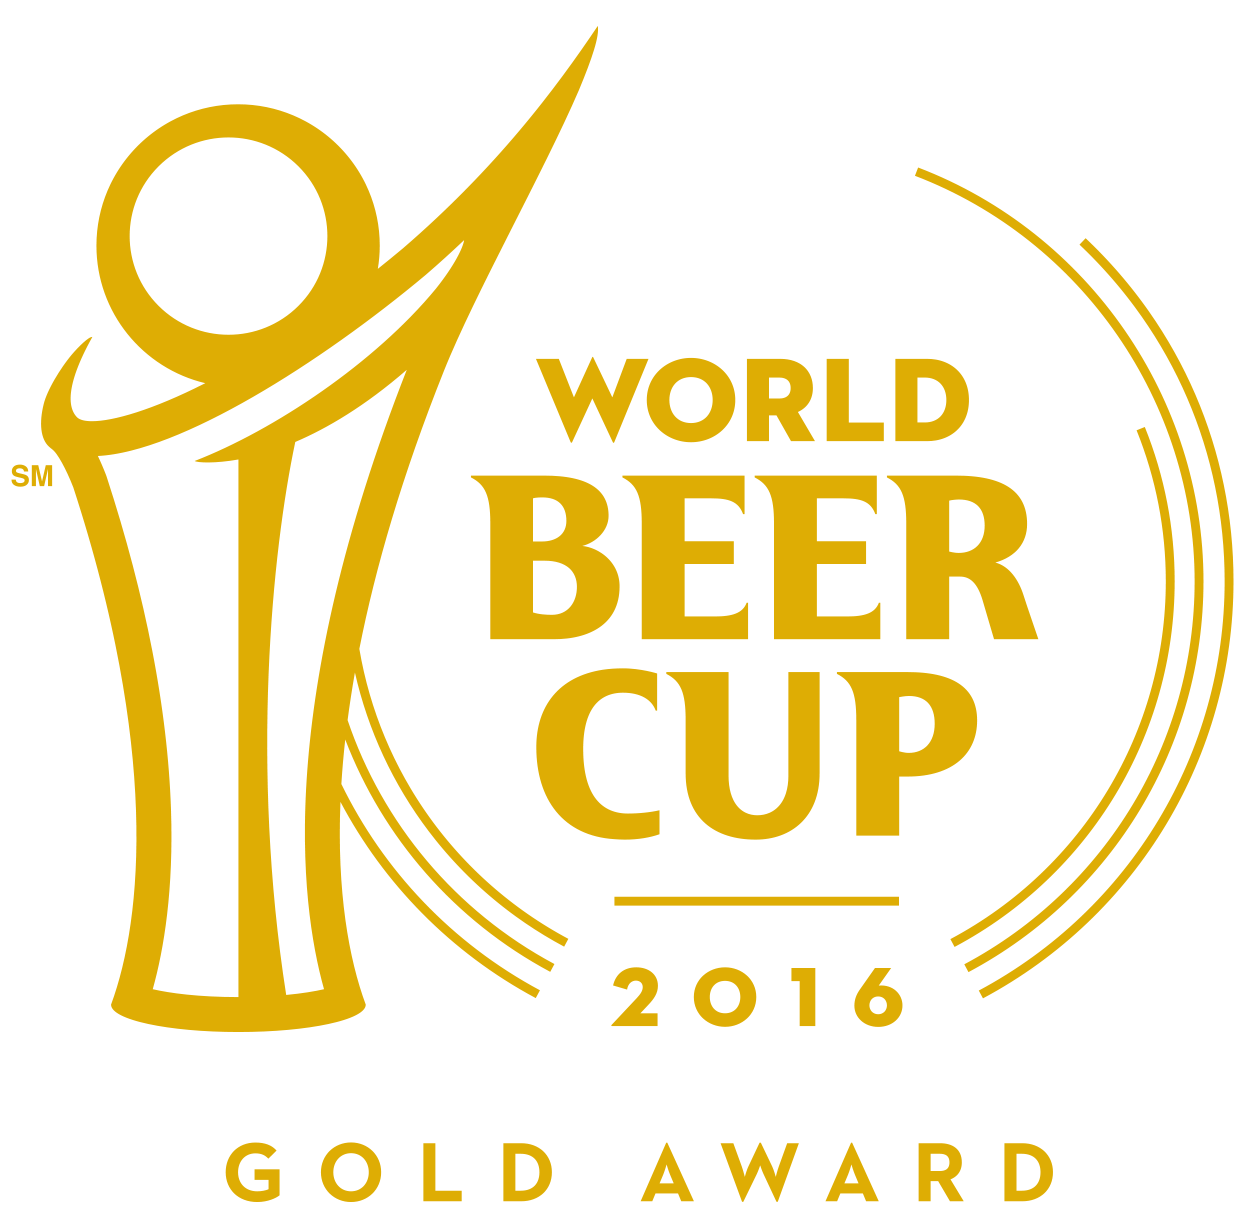  2016 World Beer Cup gold